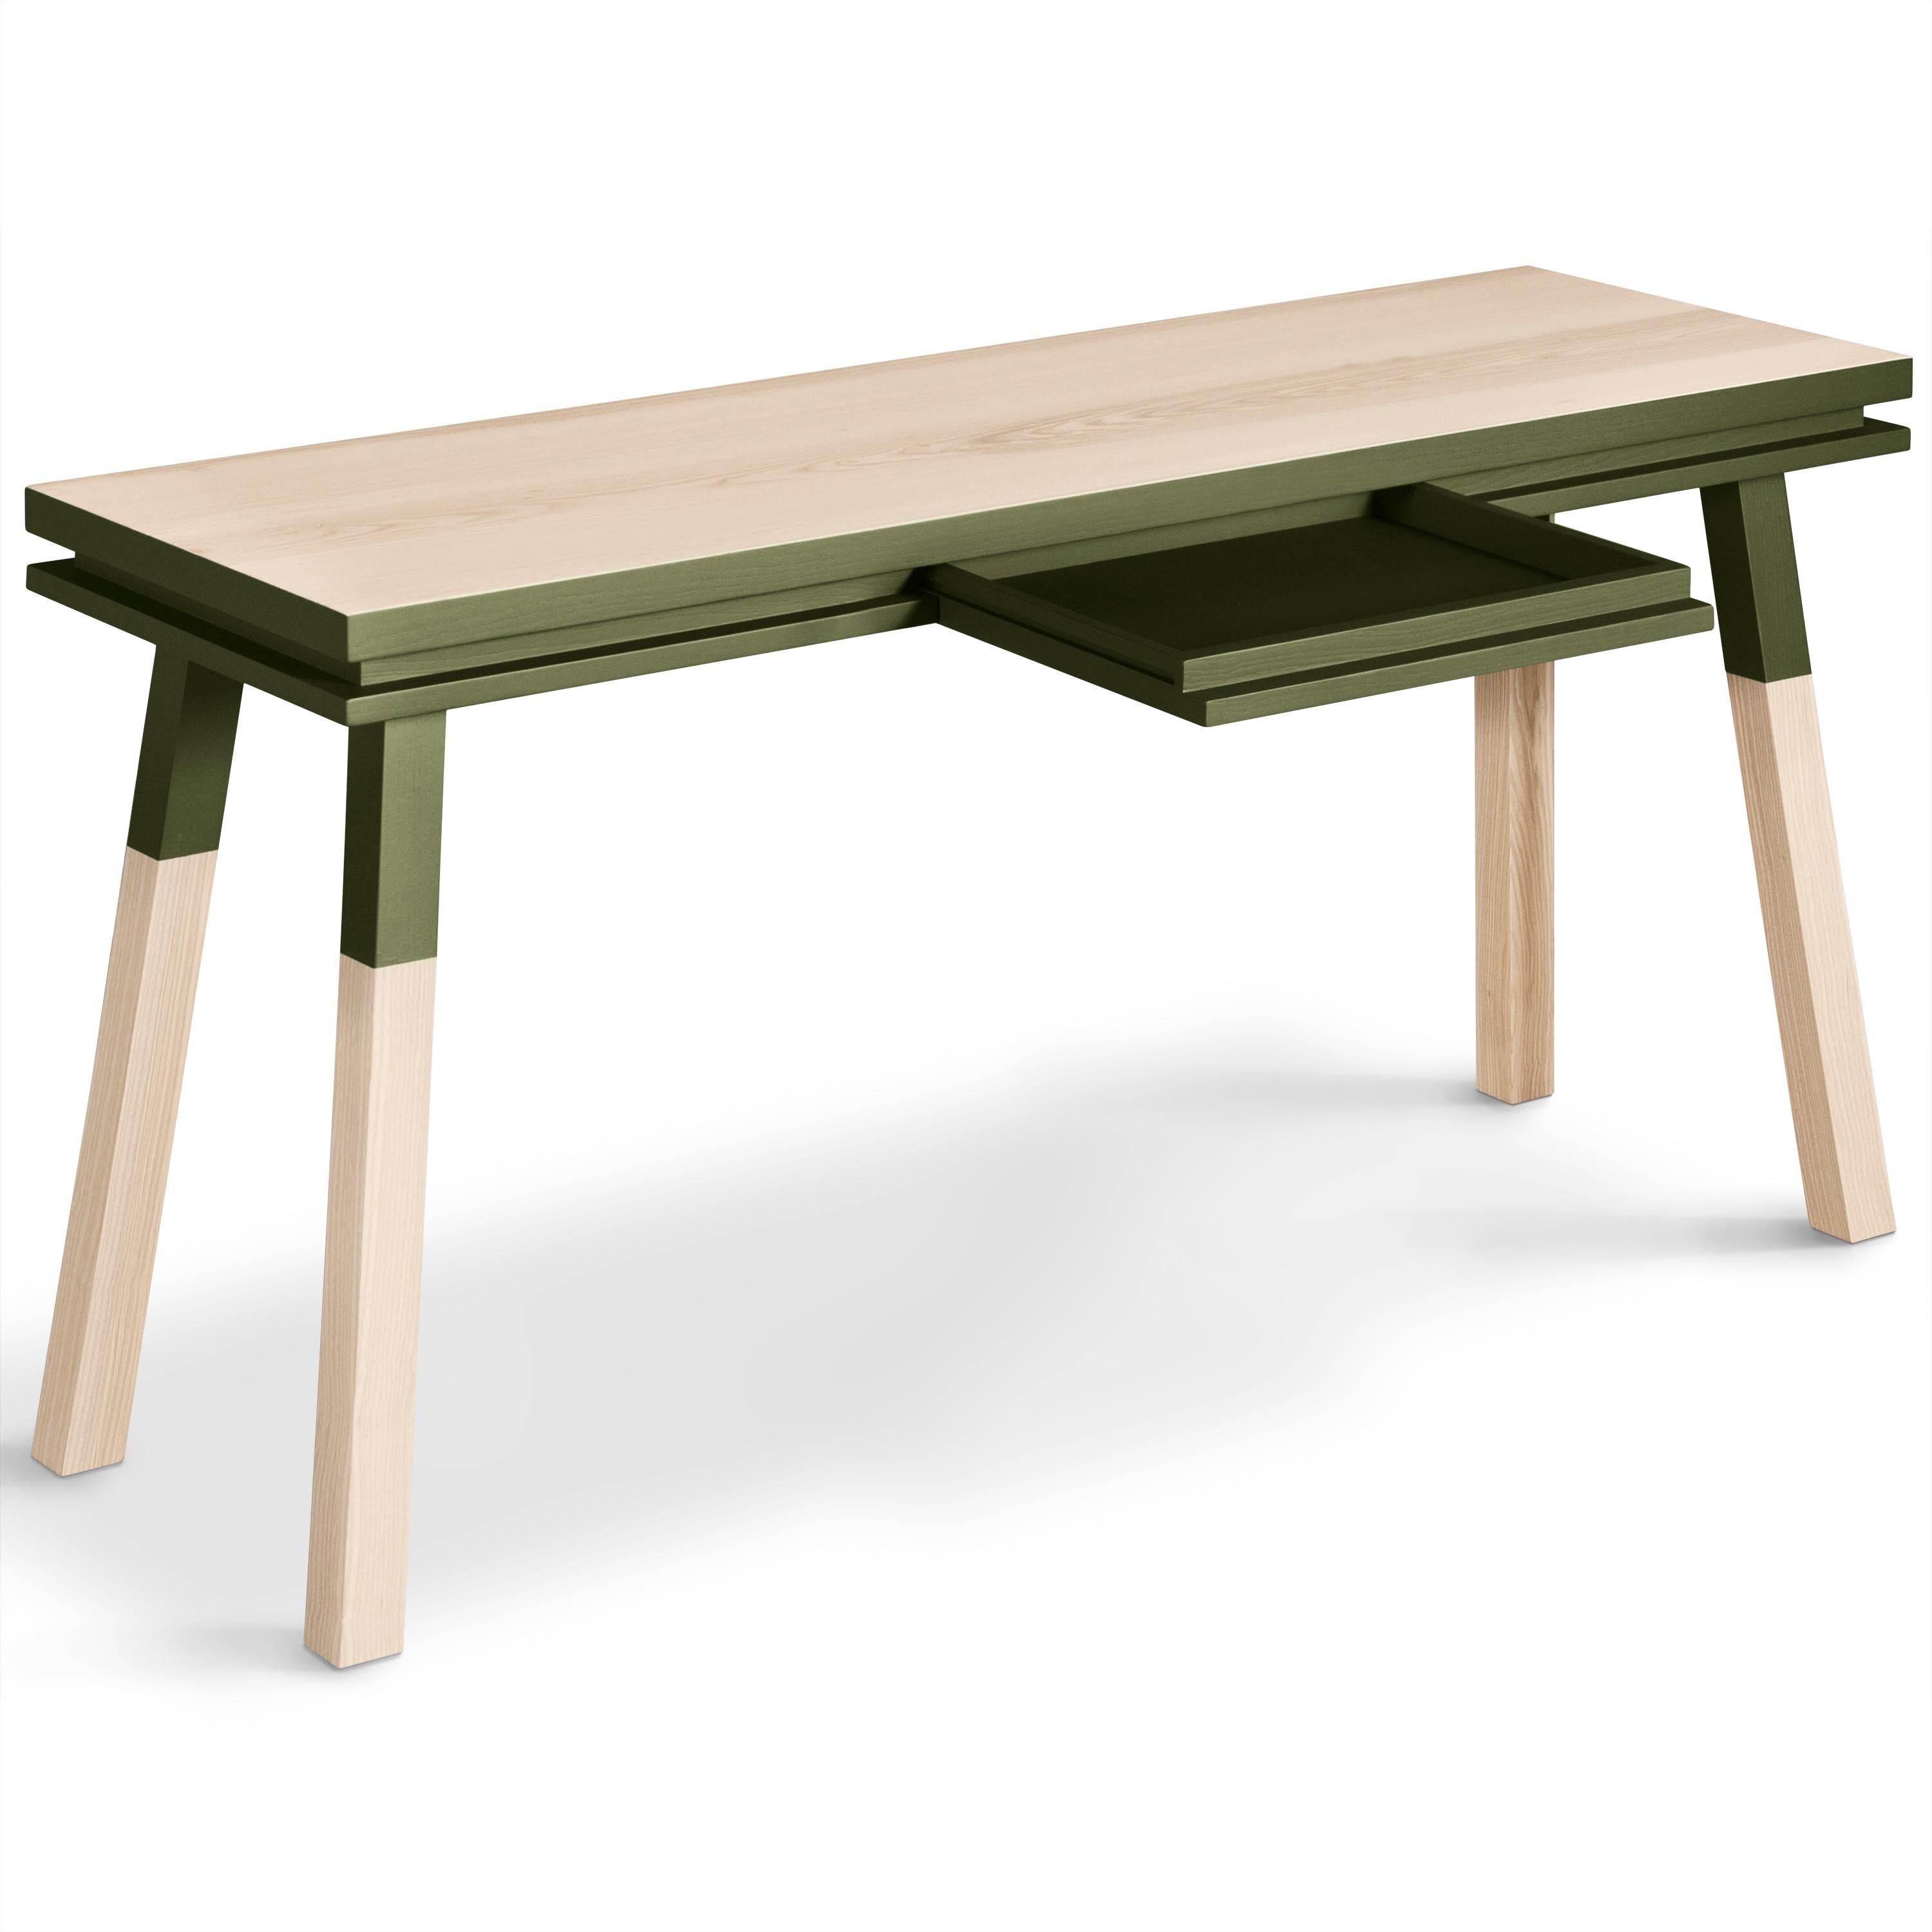 Wood Green desk table in solid Ash, design by Eric Gizard, Paris - 11 colours For Sale